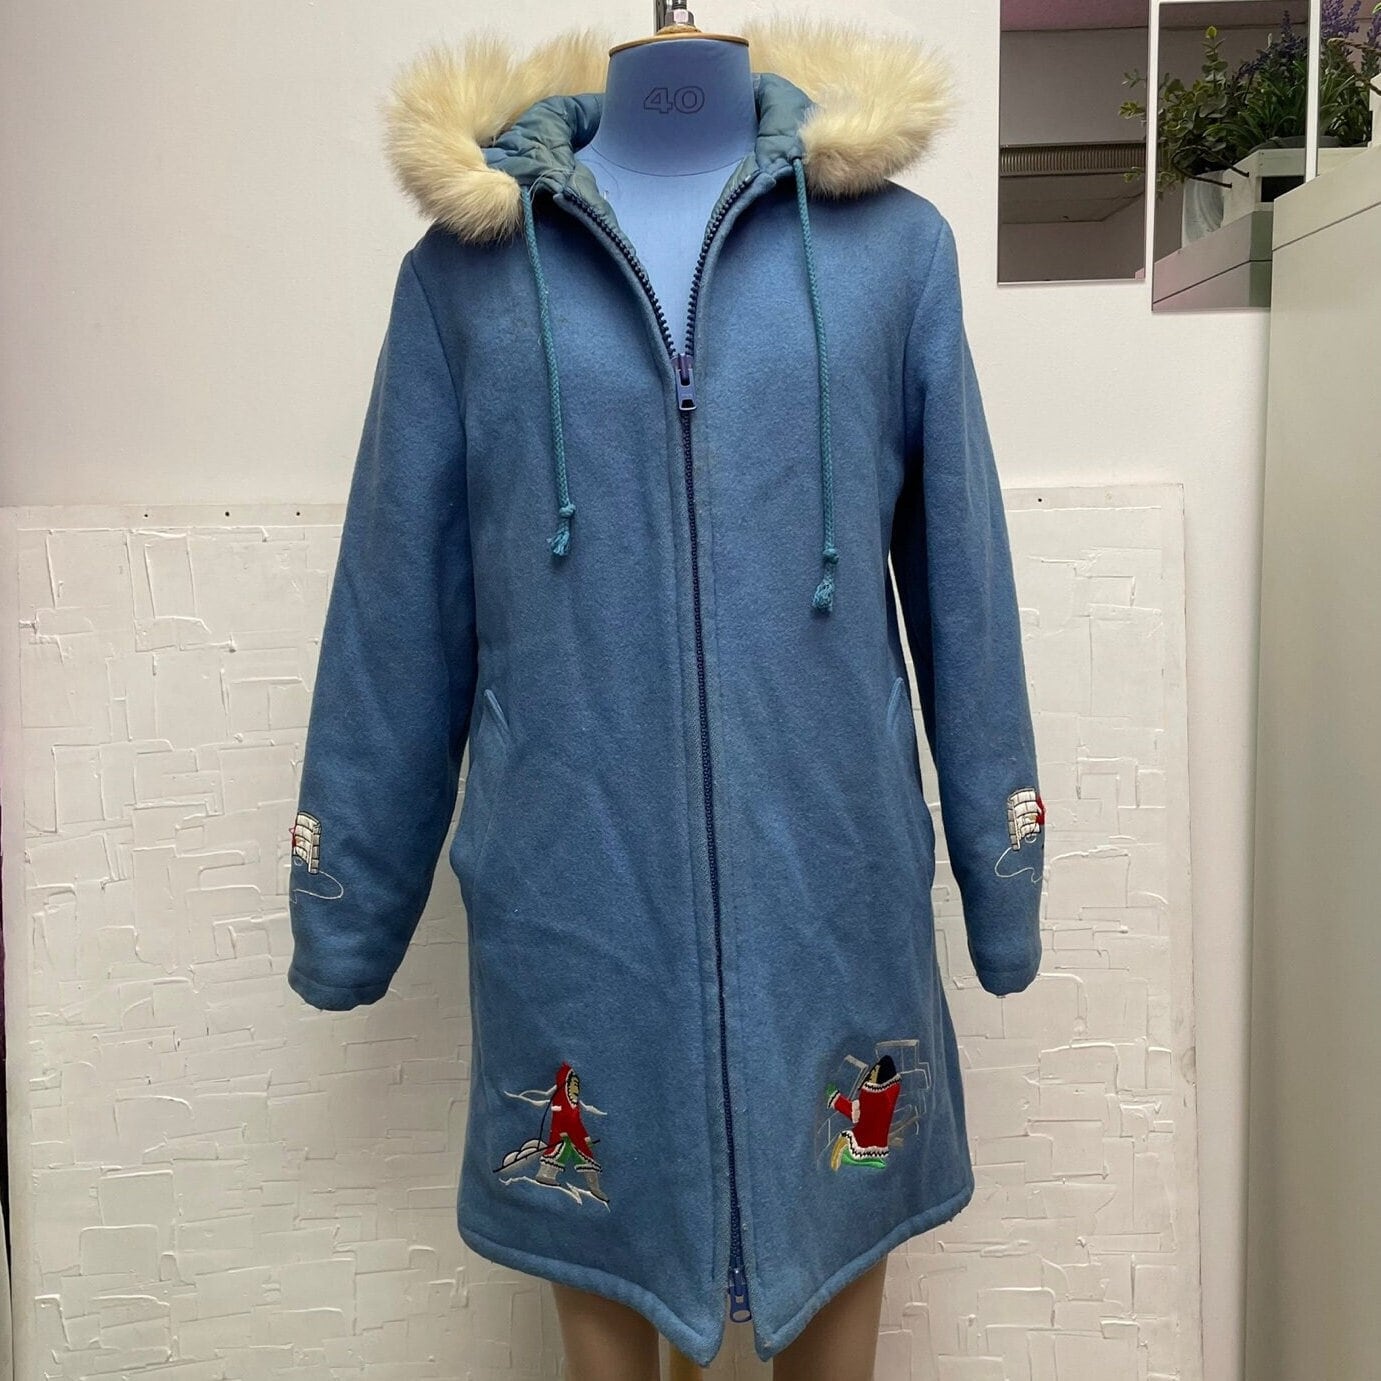 Vintage Fashion Gems Embroidered Pure Virgin Wool Parka with Fur Trim | Embroidered Parka | Fur Trim Parka | Made in Canada | SKU: M-1659